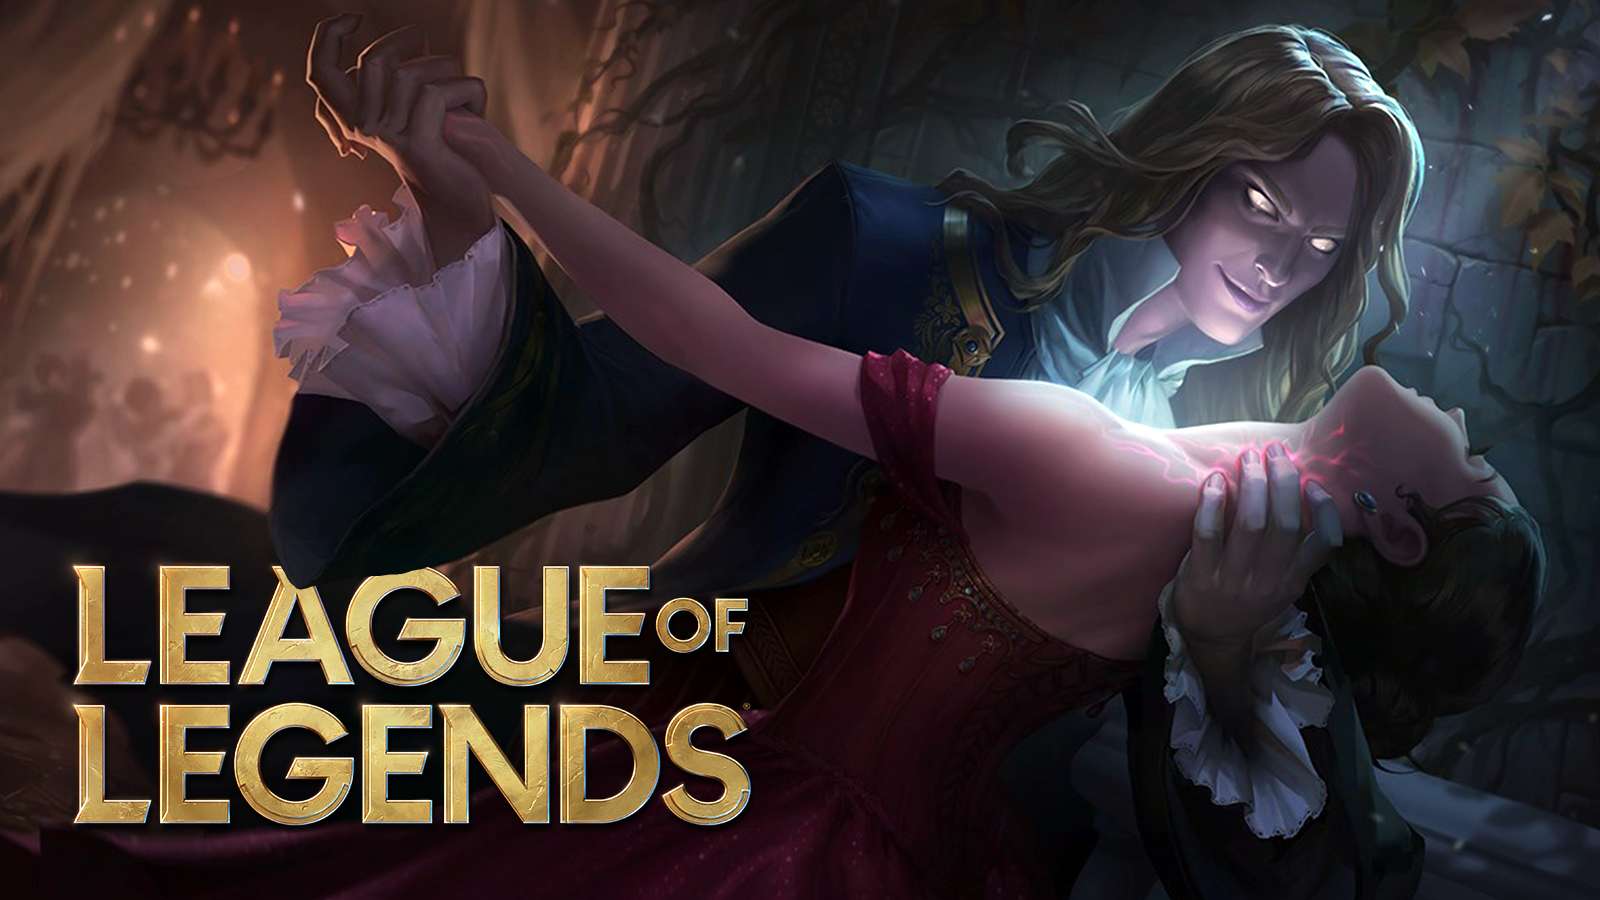 Vladimir goes for the kill in League of Legends.